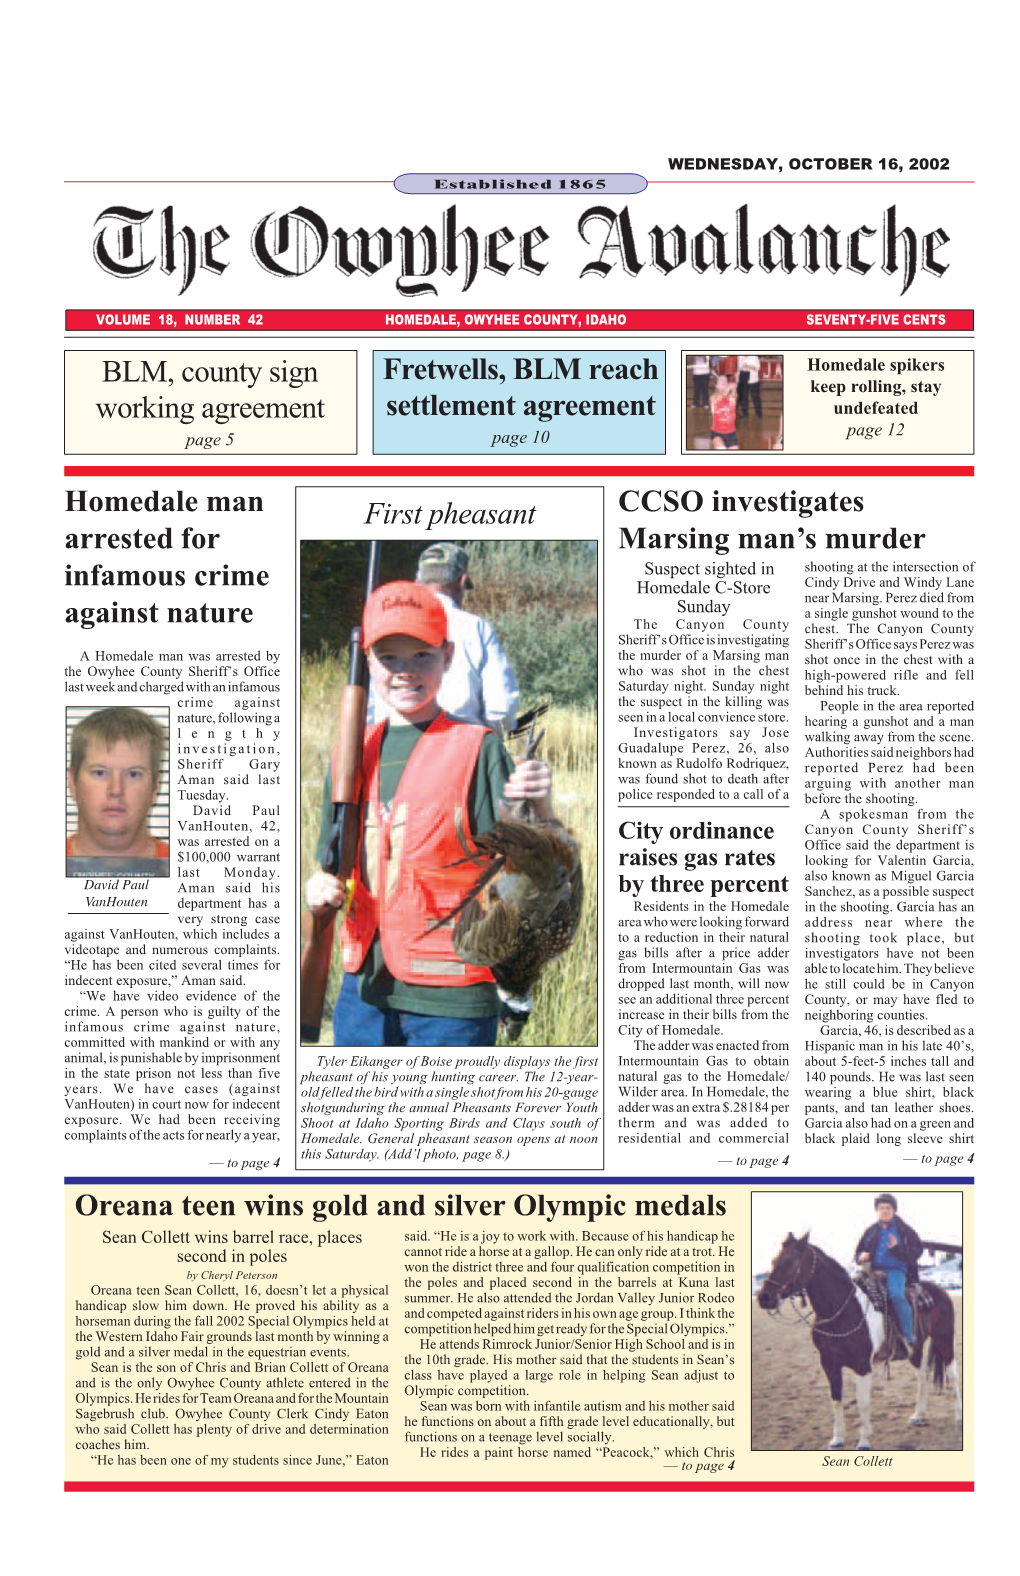 Homedale Man Arrested for Infamous Crime Against Nature Fretwells, BLM Reach Settlement Agreement Oreana Teen Wins Gold and Silv